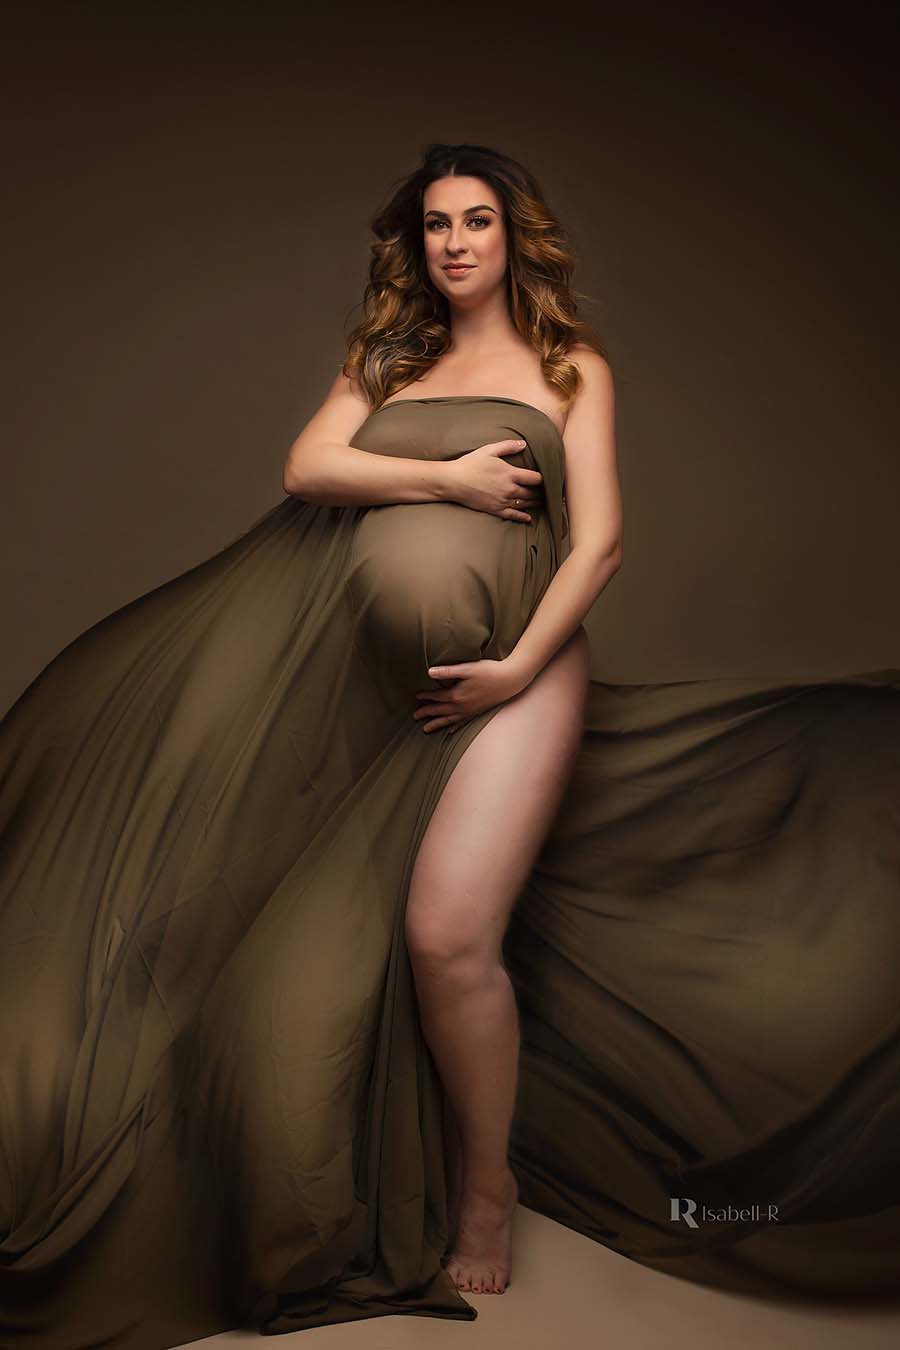 A tall model is wraped in a scarf. The scarf is a little bit see trough and creates beautiful wave effects. The model is pregnant